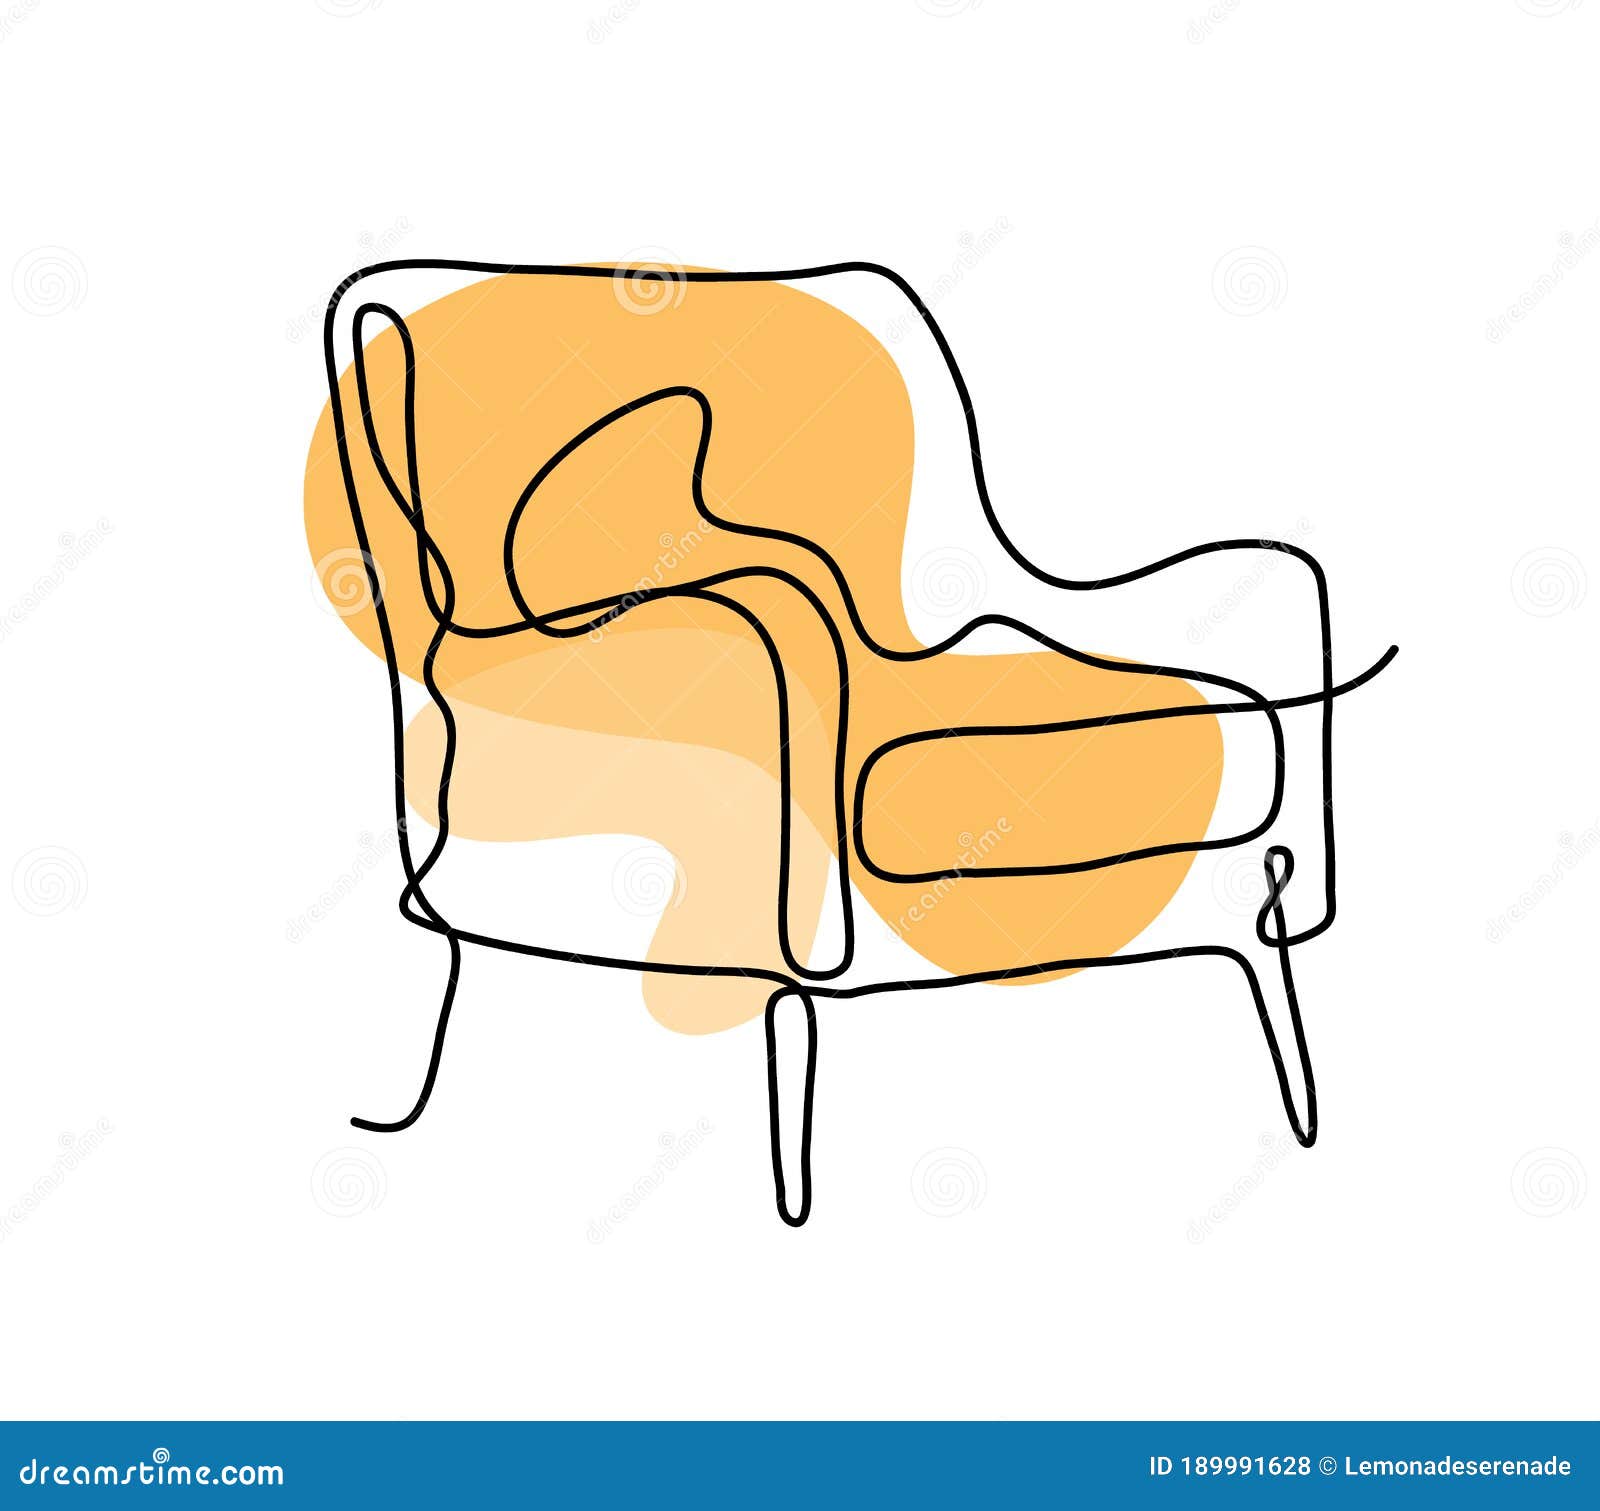 continuous line drawing of a chair sofa with desaturated background color, hand drawn aesthetic continuous line drawing of a chair